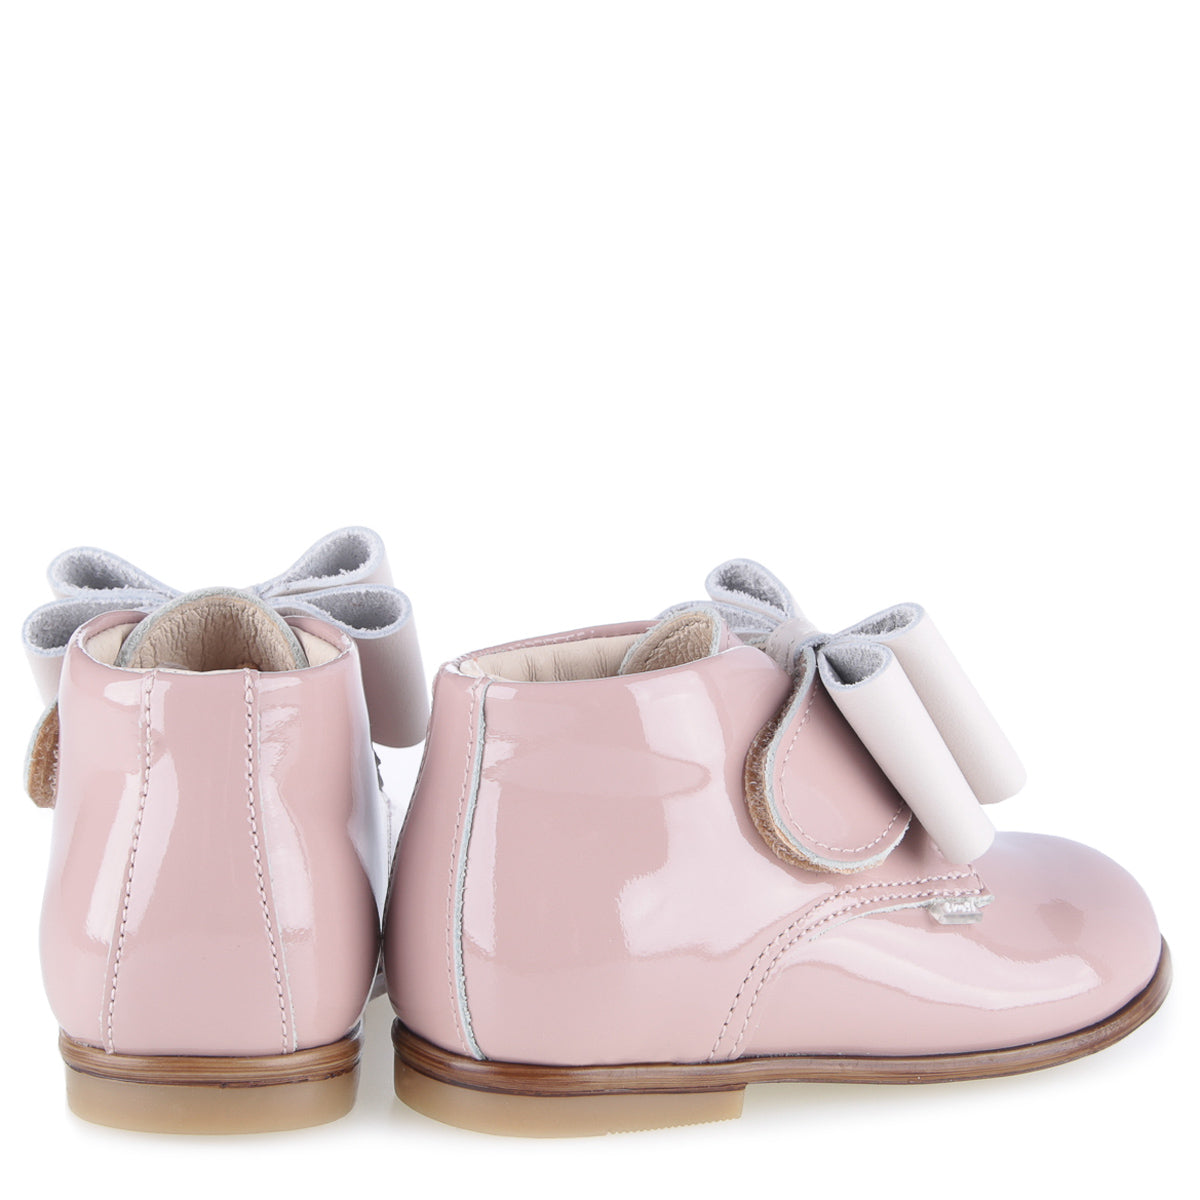 Emel Dusty Pink Patent Bow/Velcro Booties